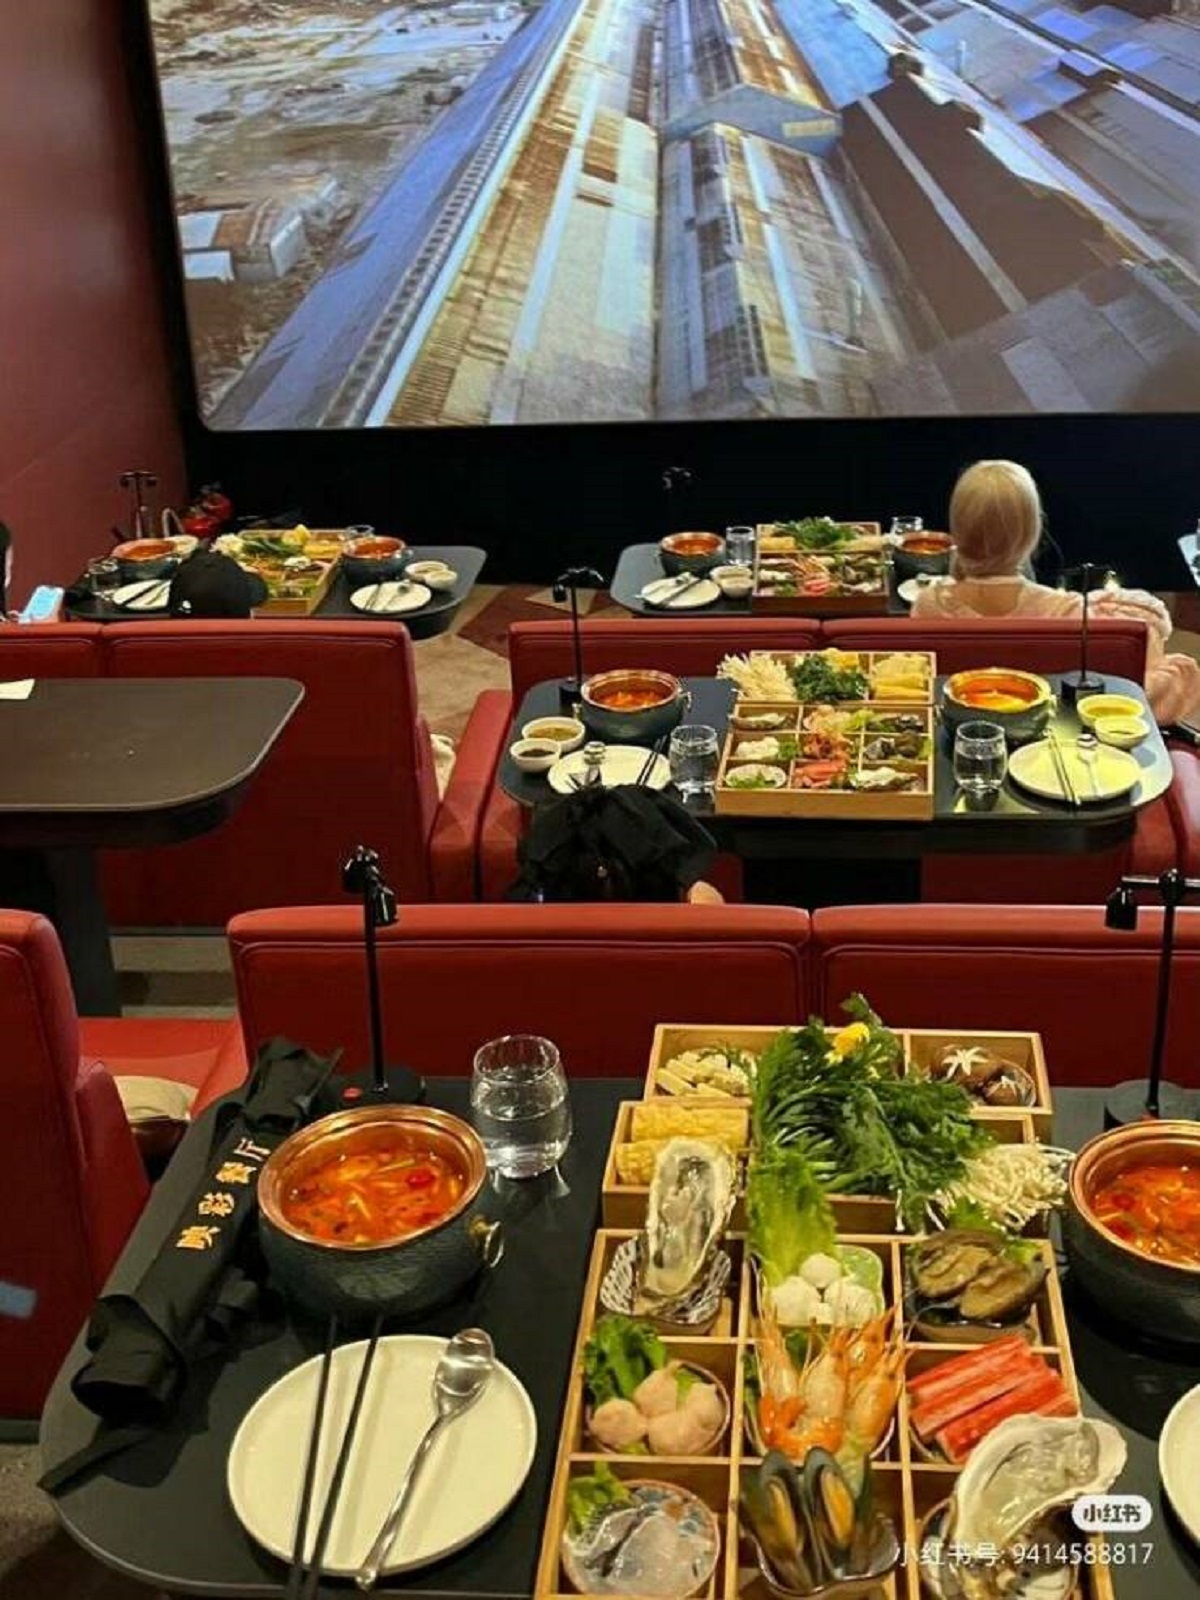 "You can have hot pot in theaters in China."